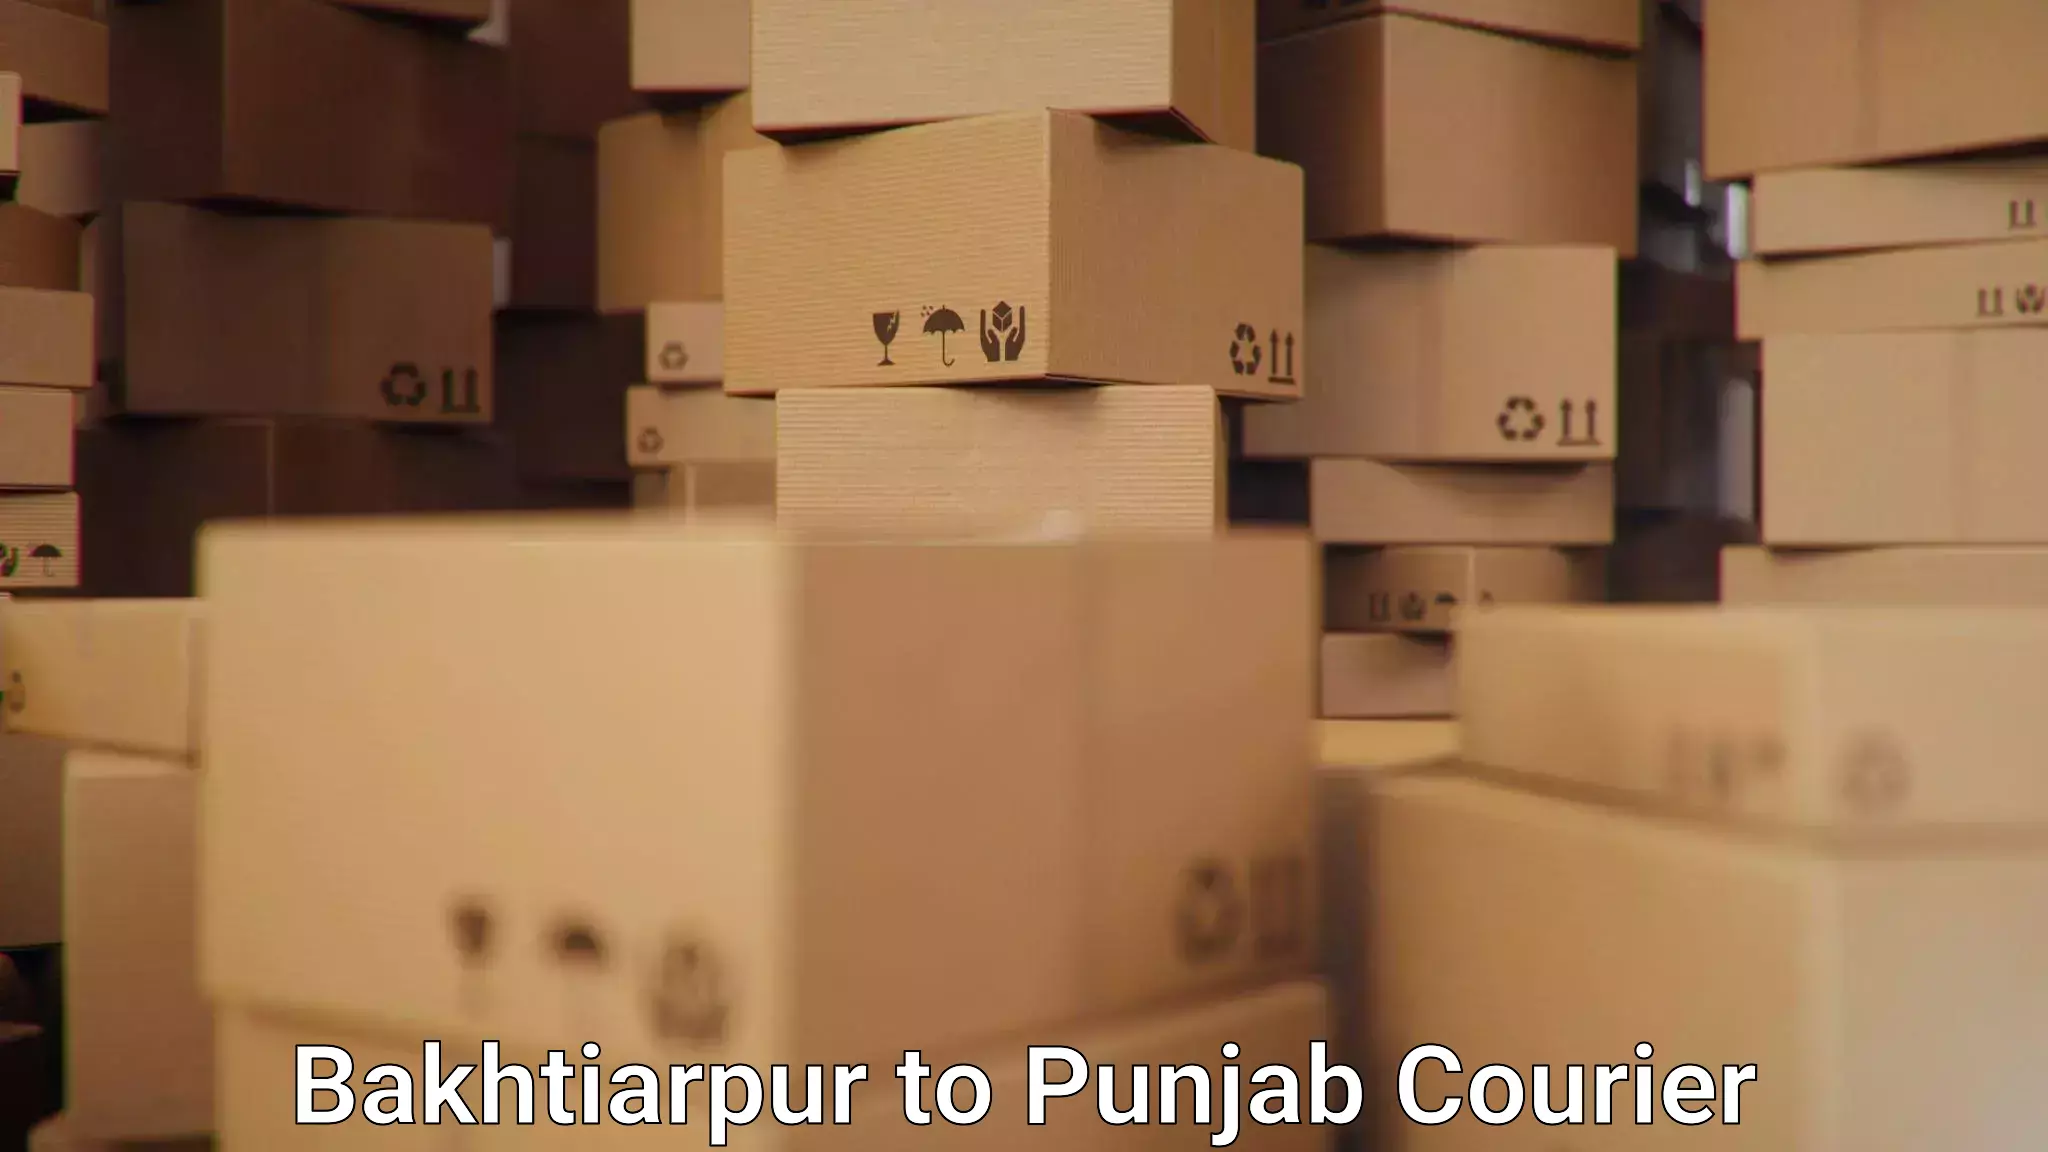 Express delivery network Bakhtiarpur to Dhuri